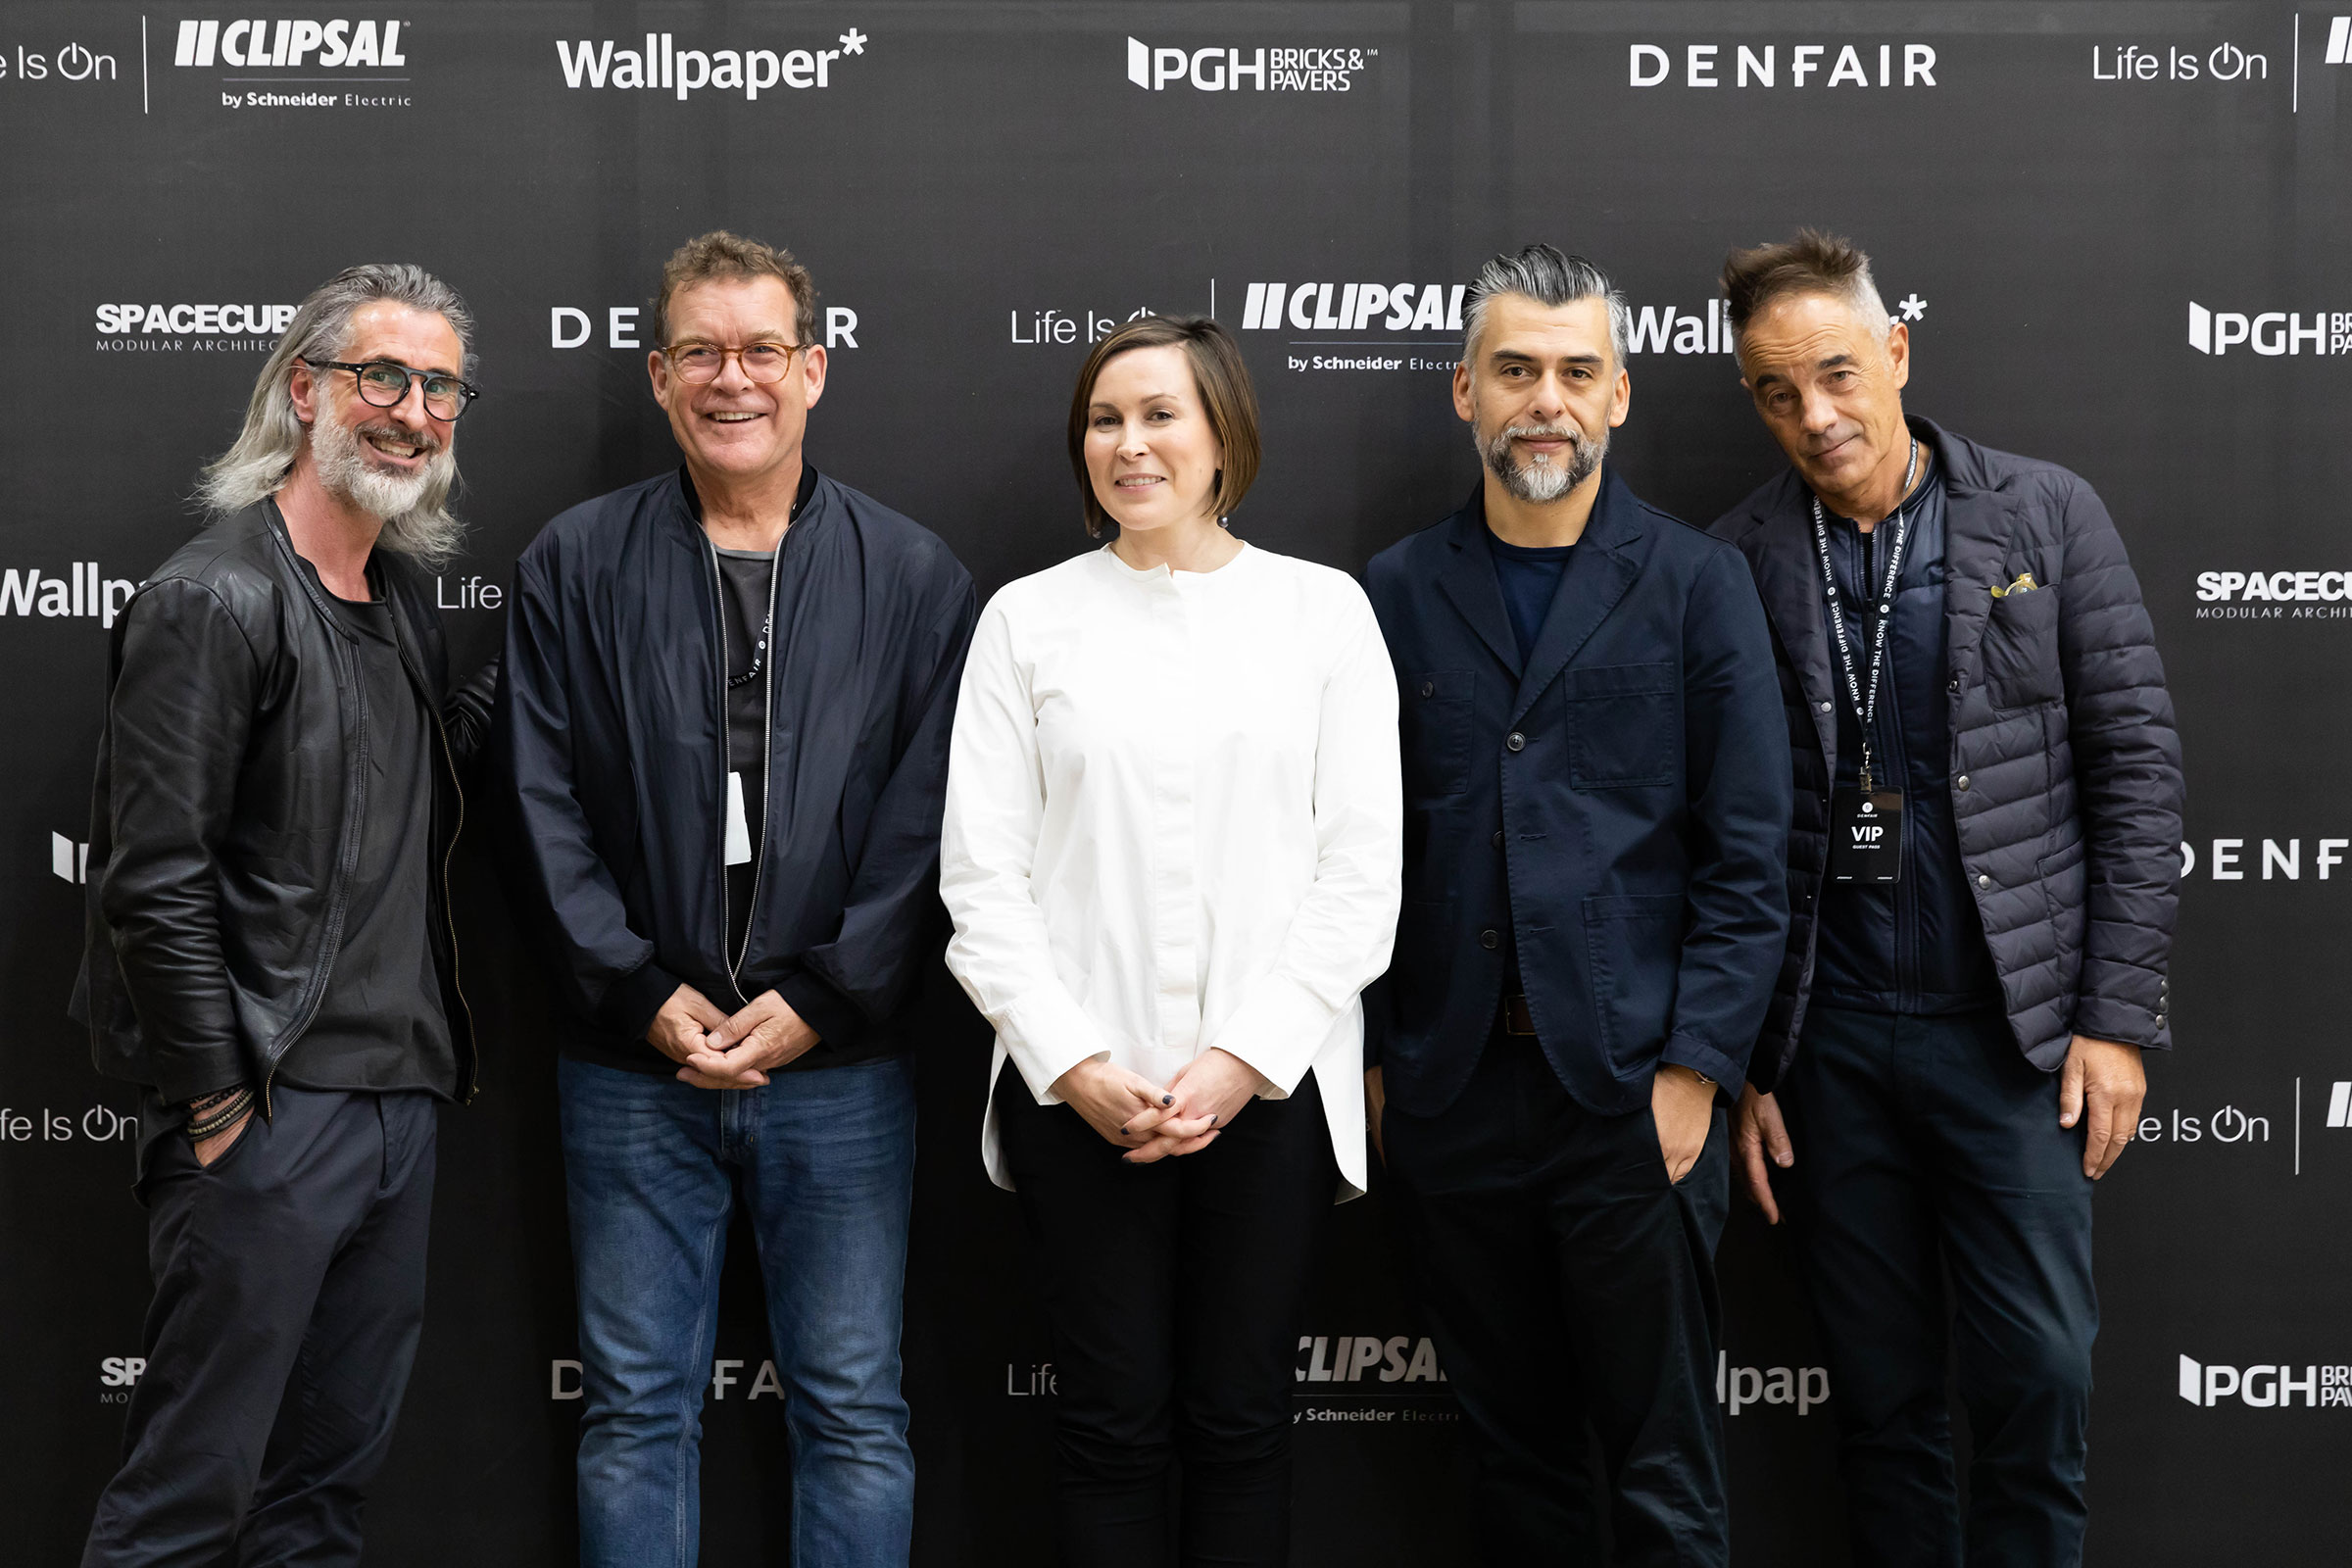  DENFAIR awards 2019 judges with organisers, left to right: Thibaud Cau-Cecile,  Rob Mills , Suzy Annetta, Claudio Oyarce and  Chris Connell  